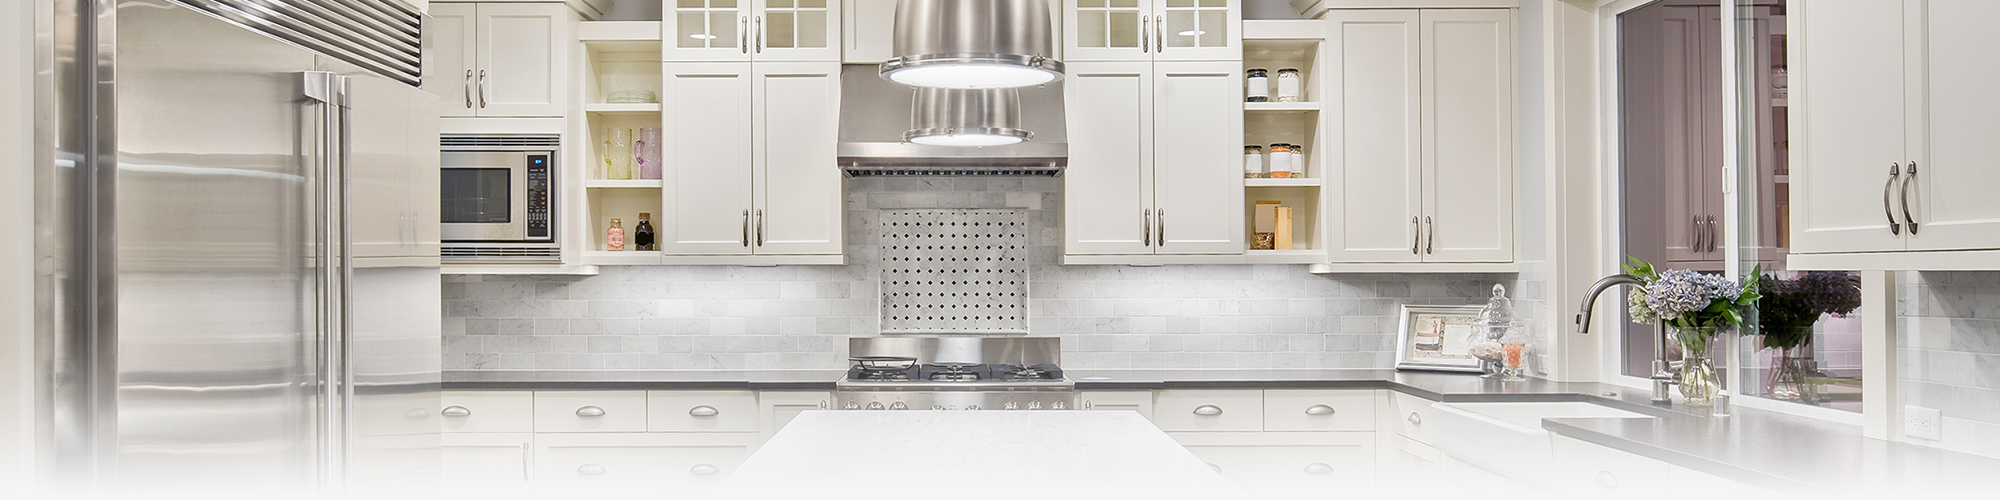 Selecting the Right Range Hood for Your Kitchen - Dura Supreme Cabinetry